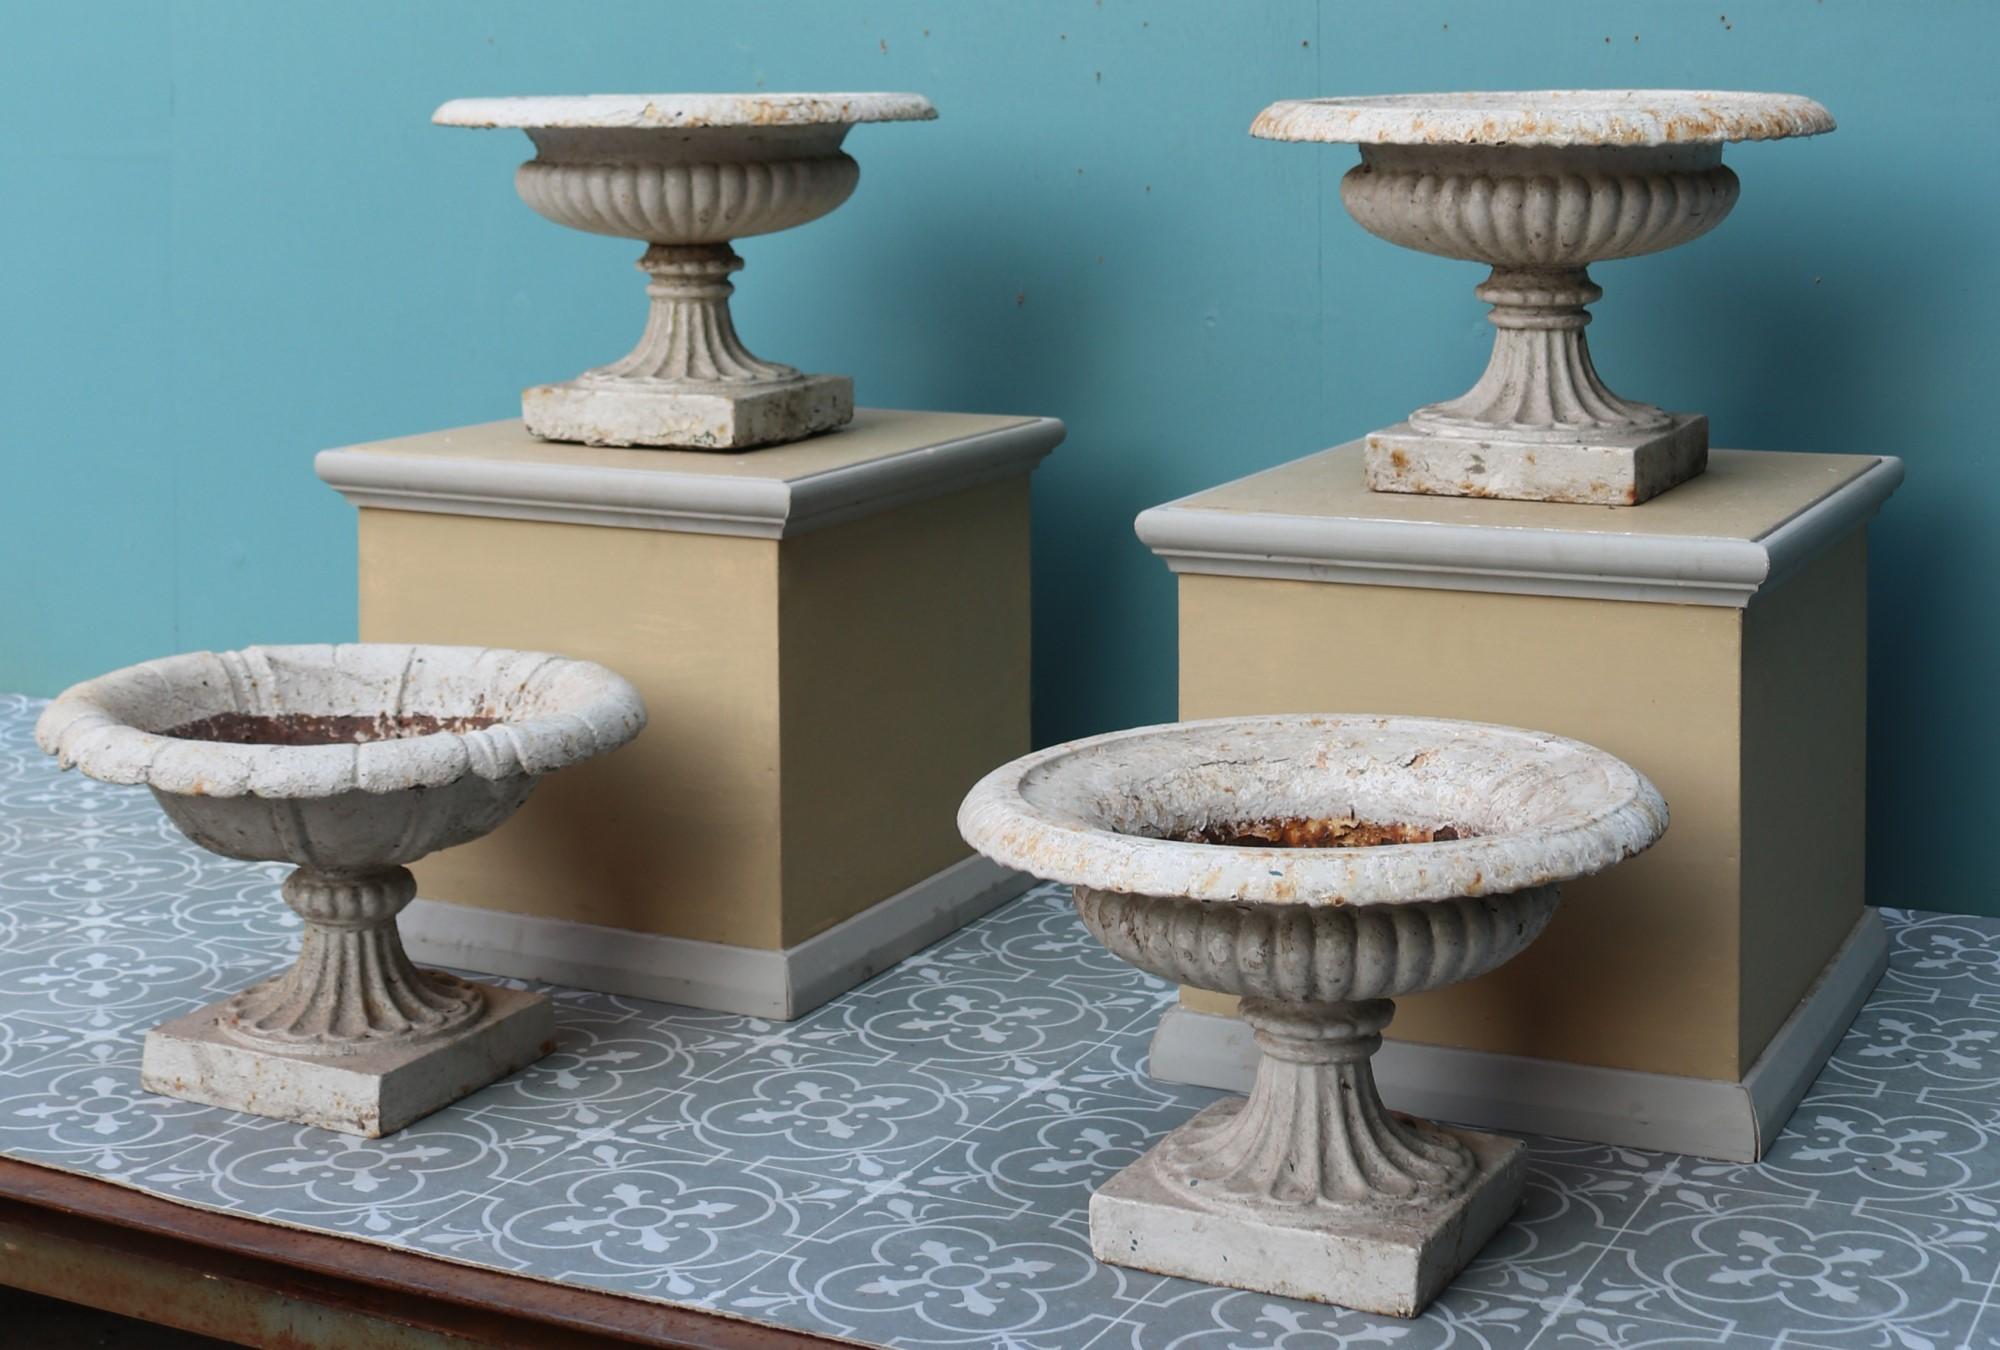 A set of shallow Victorian tazza urns. Three are identical and one slightly different at the top.

Additional Dimensions:

Bases 19 x 19 cm